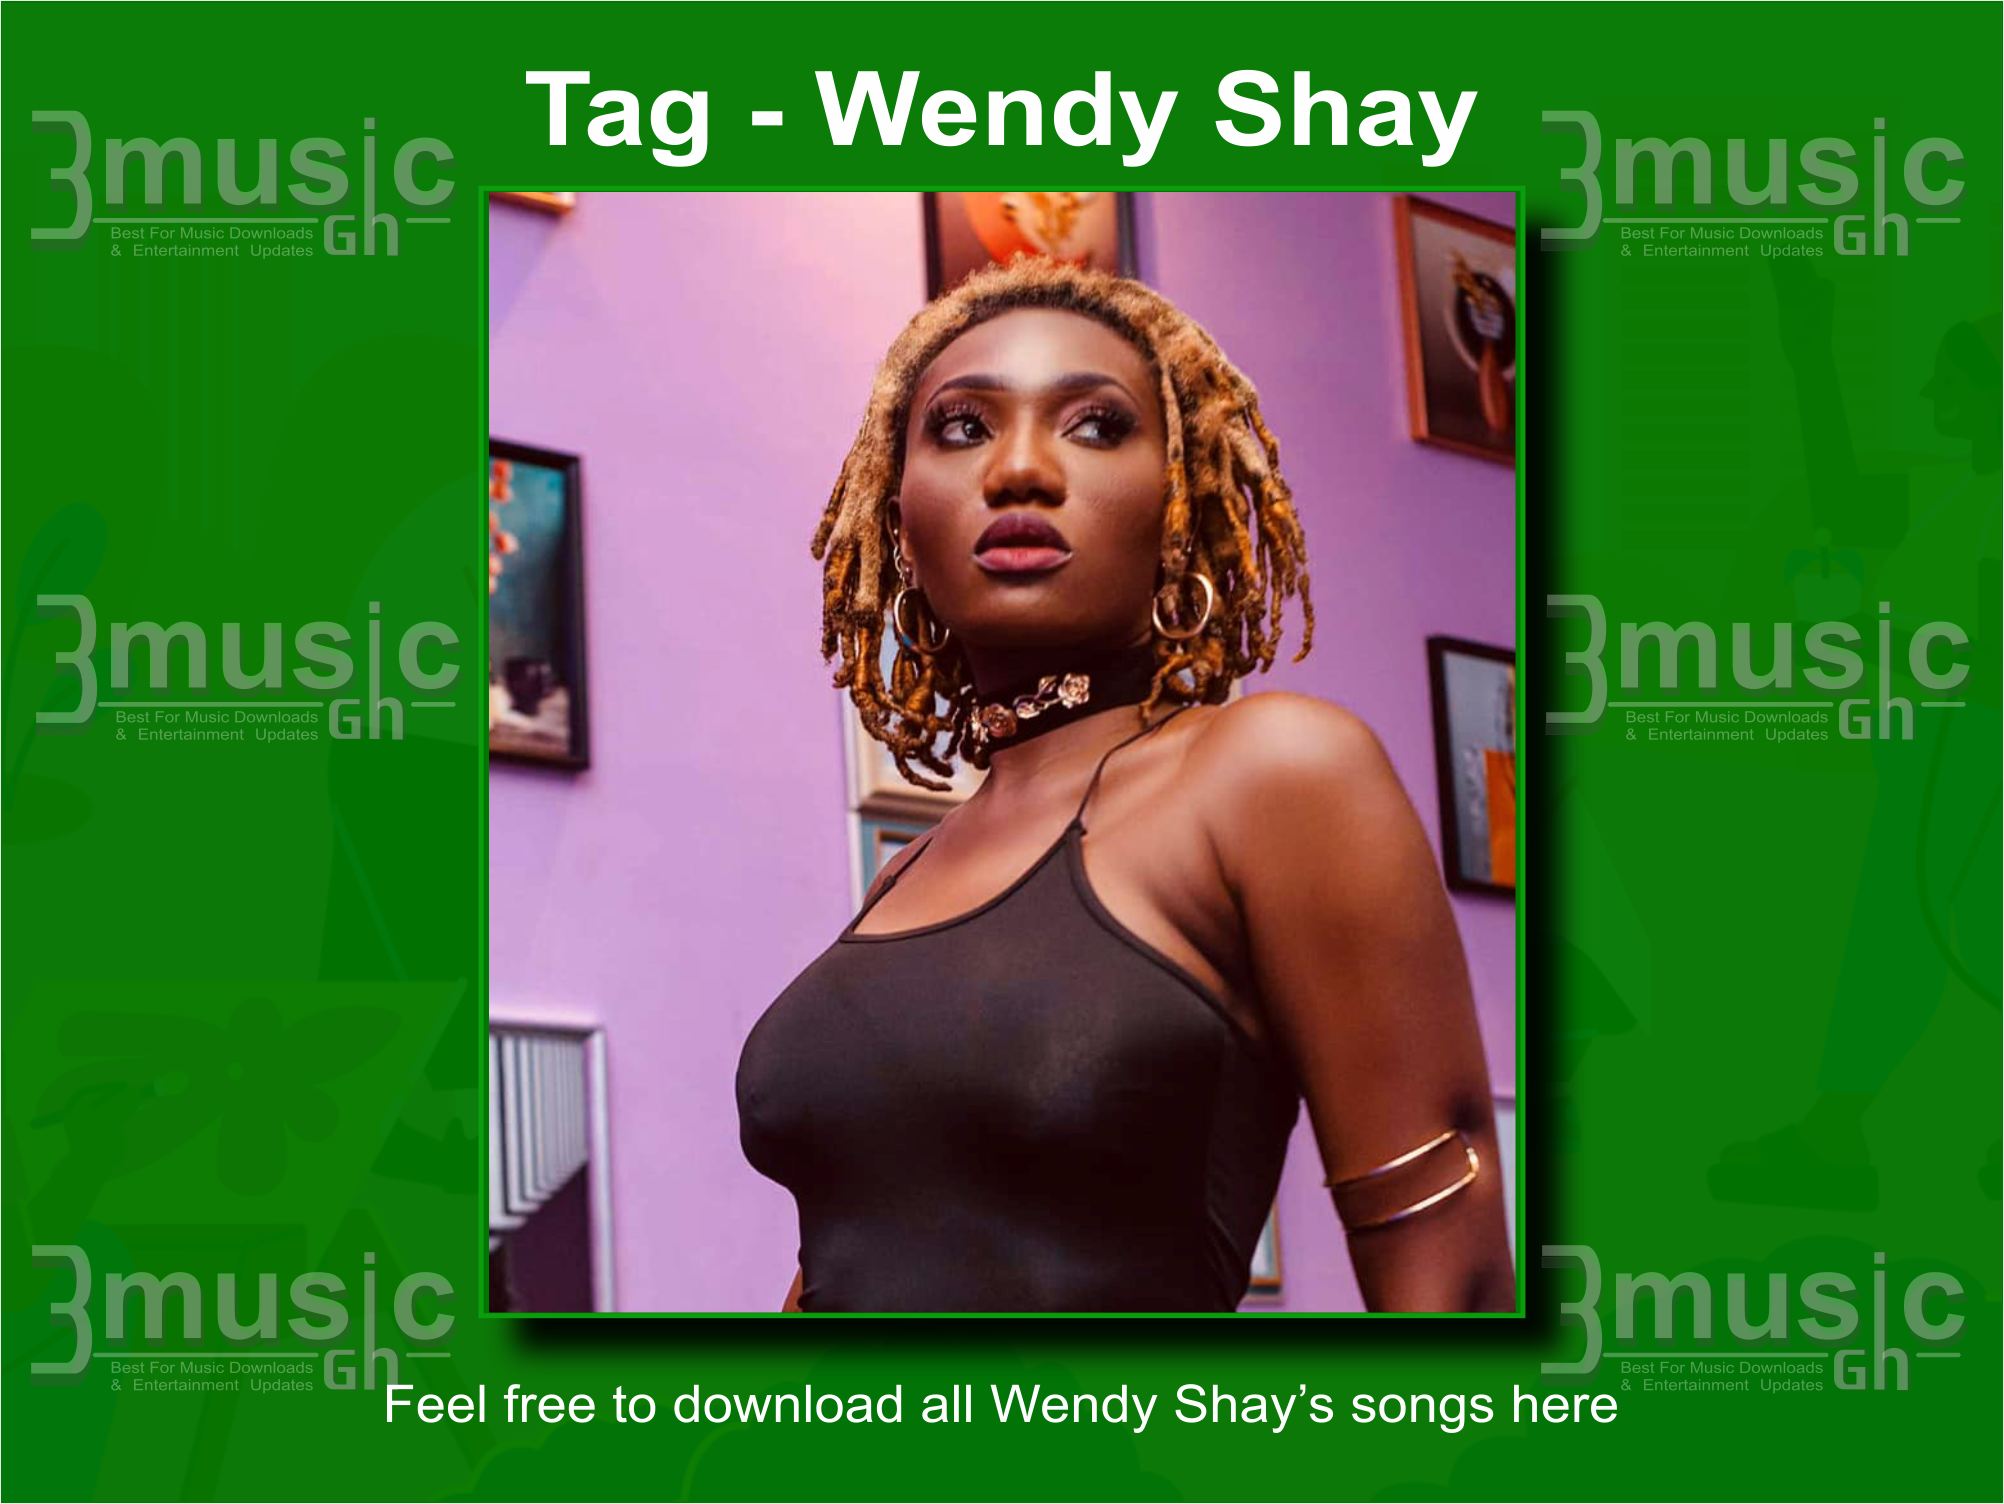 Wendy Shay songs all download_3musicgh.com